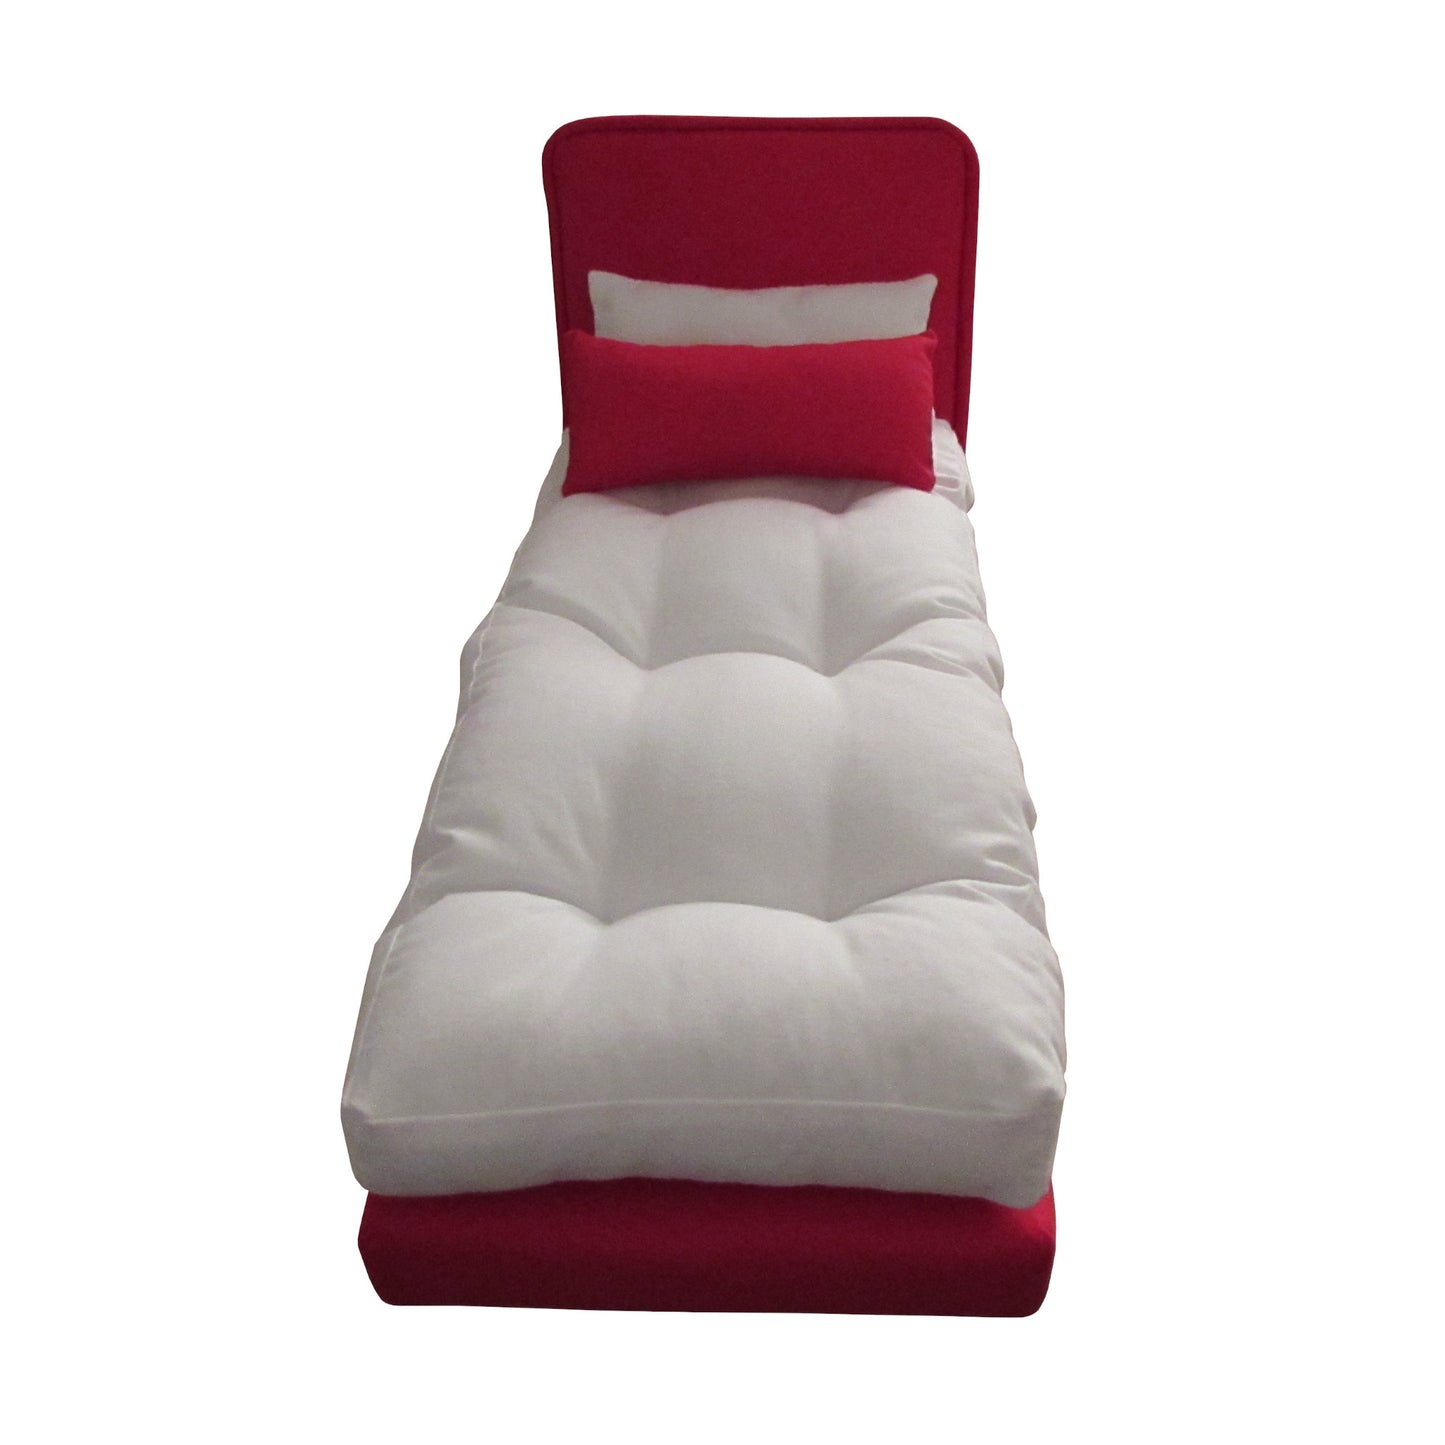 Upholstered Red Doll Bed for 11.5-inch and 12-inch dolls Third view